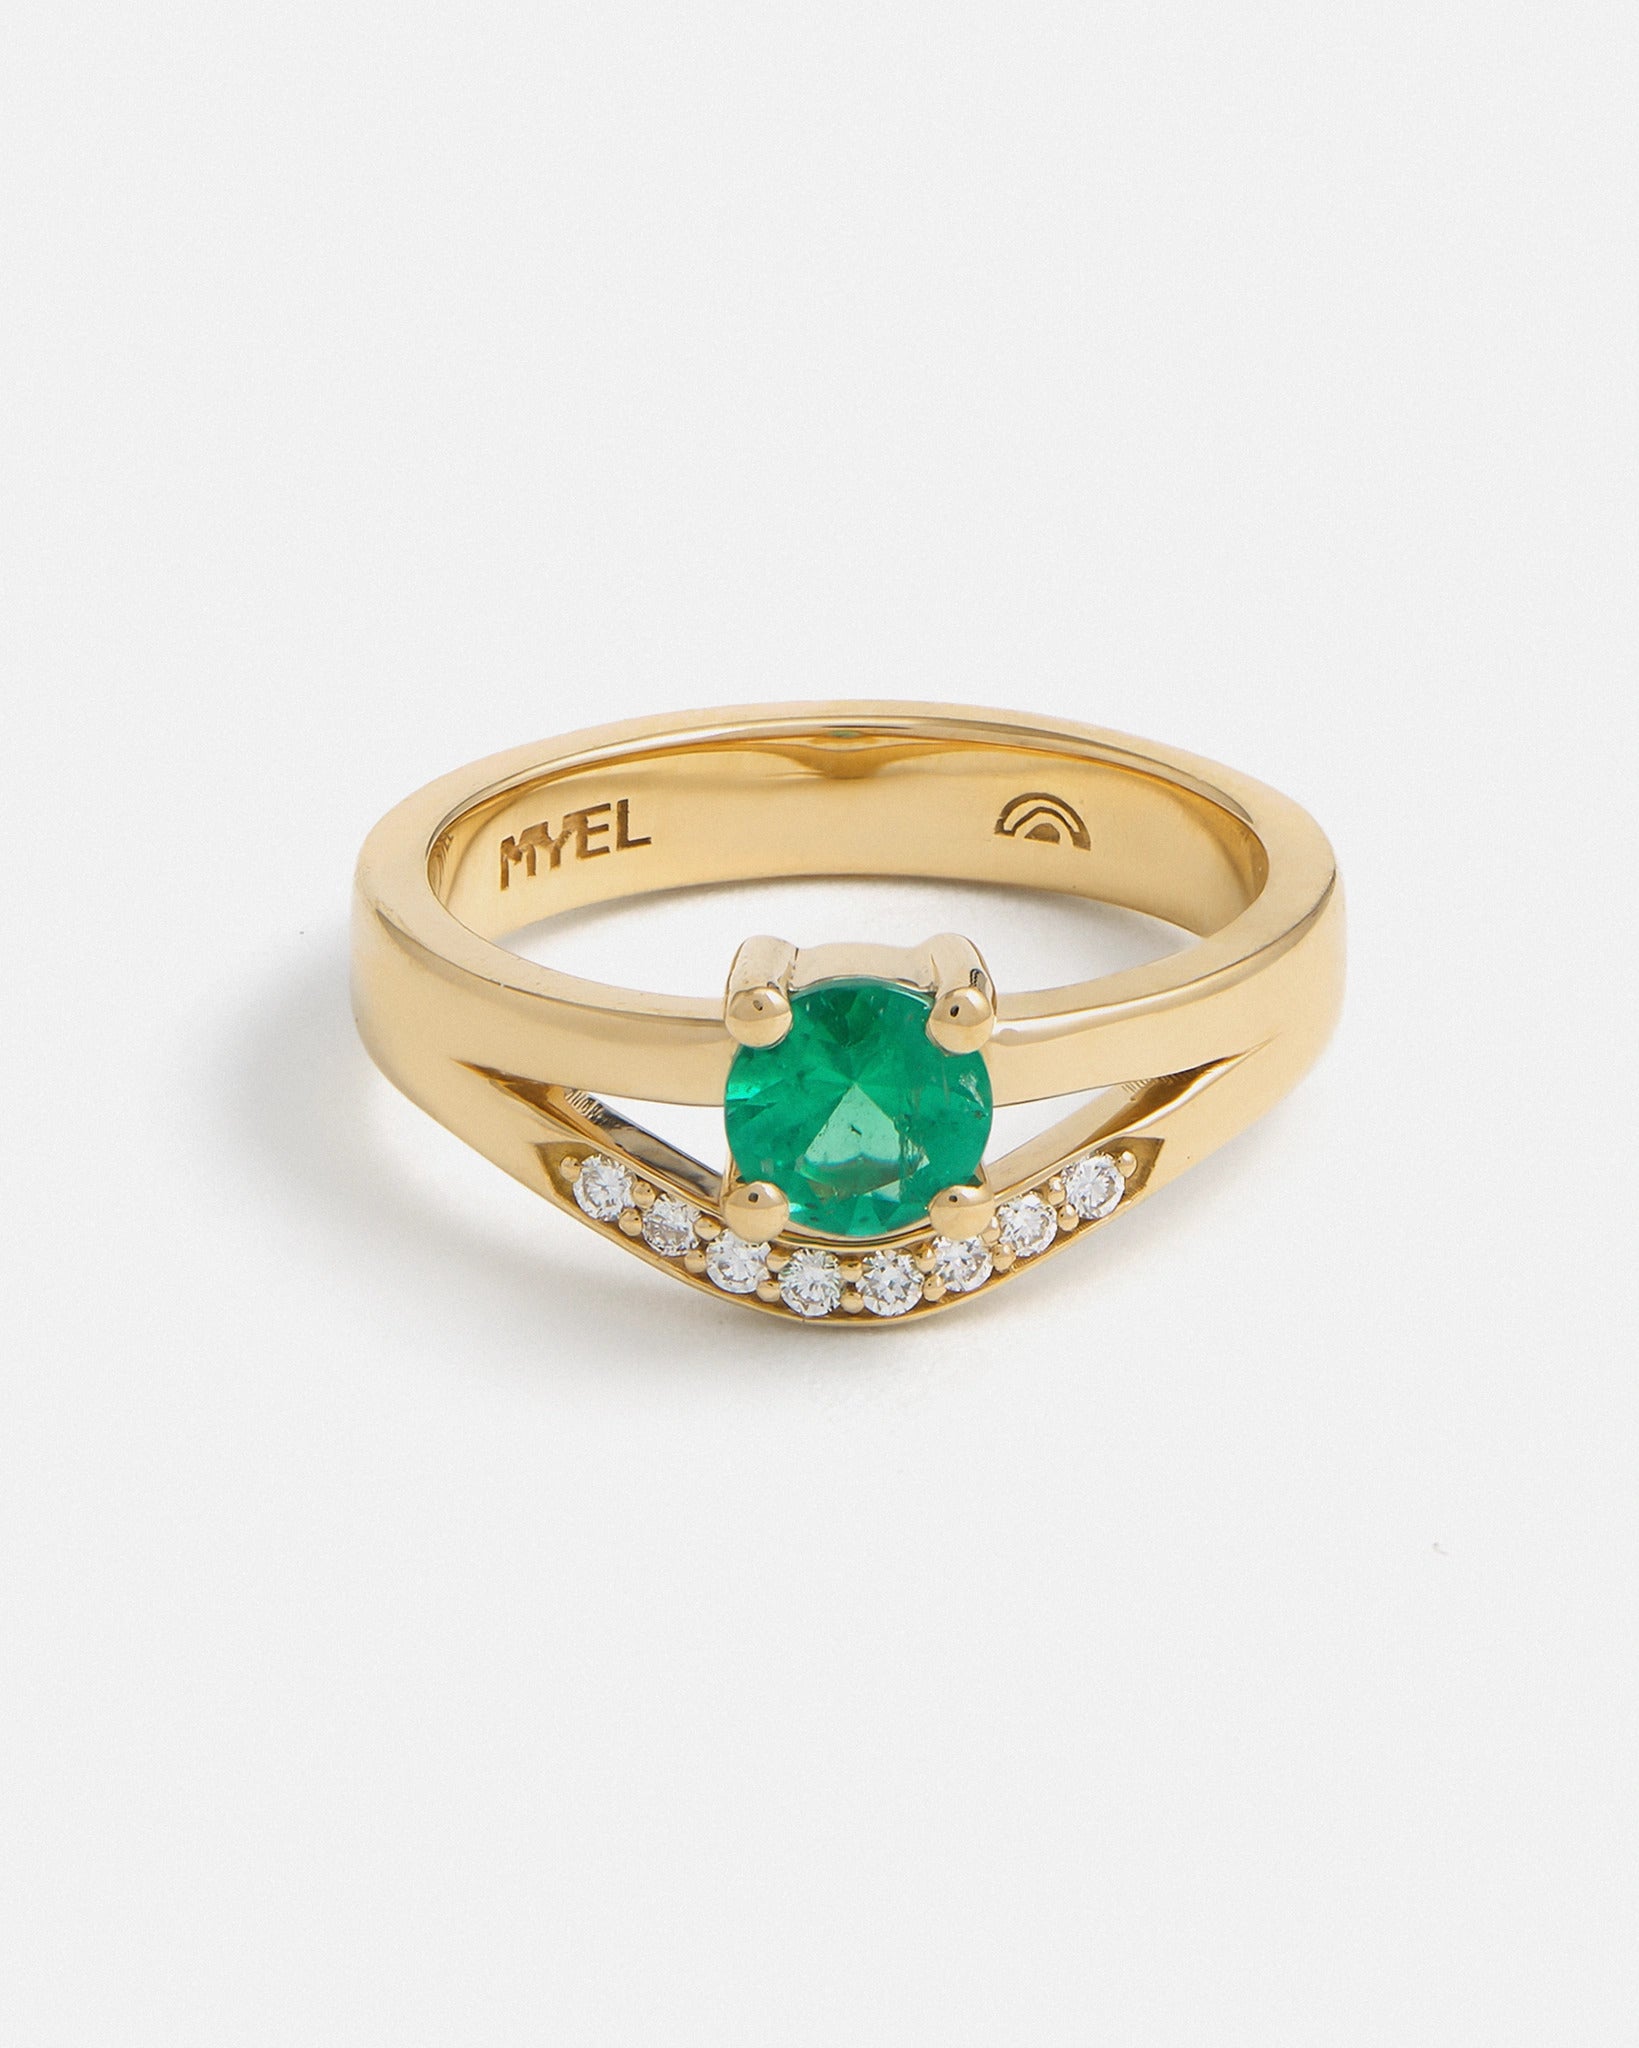 Custom Ring - Fusion Ring in Fairmined Gold with Brazilian Emerald Solitaire and Lab Grown Diamonds Stratura band